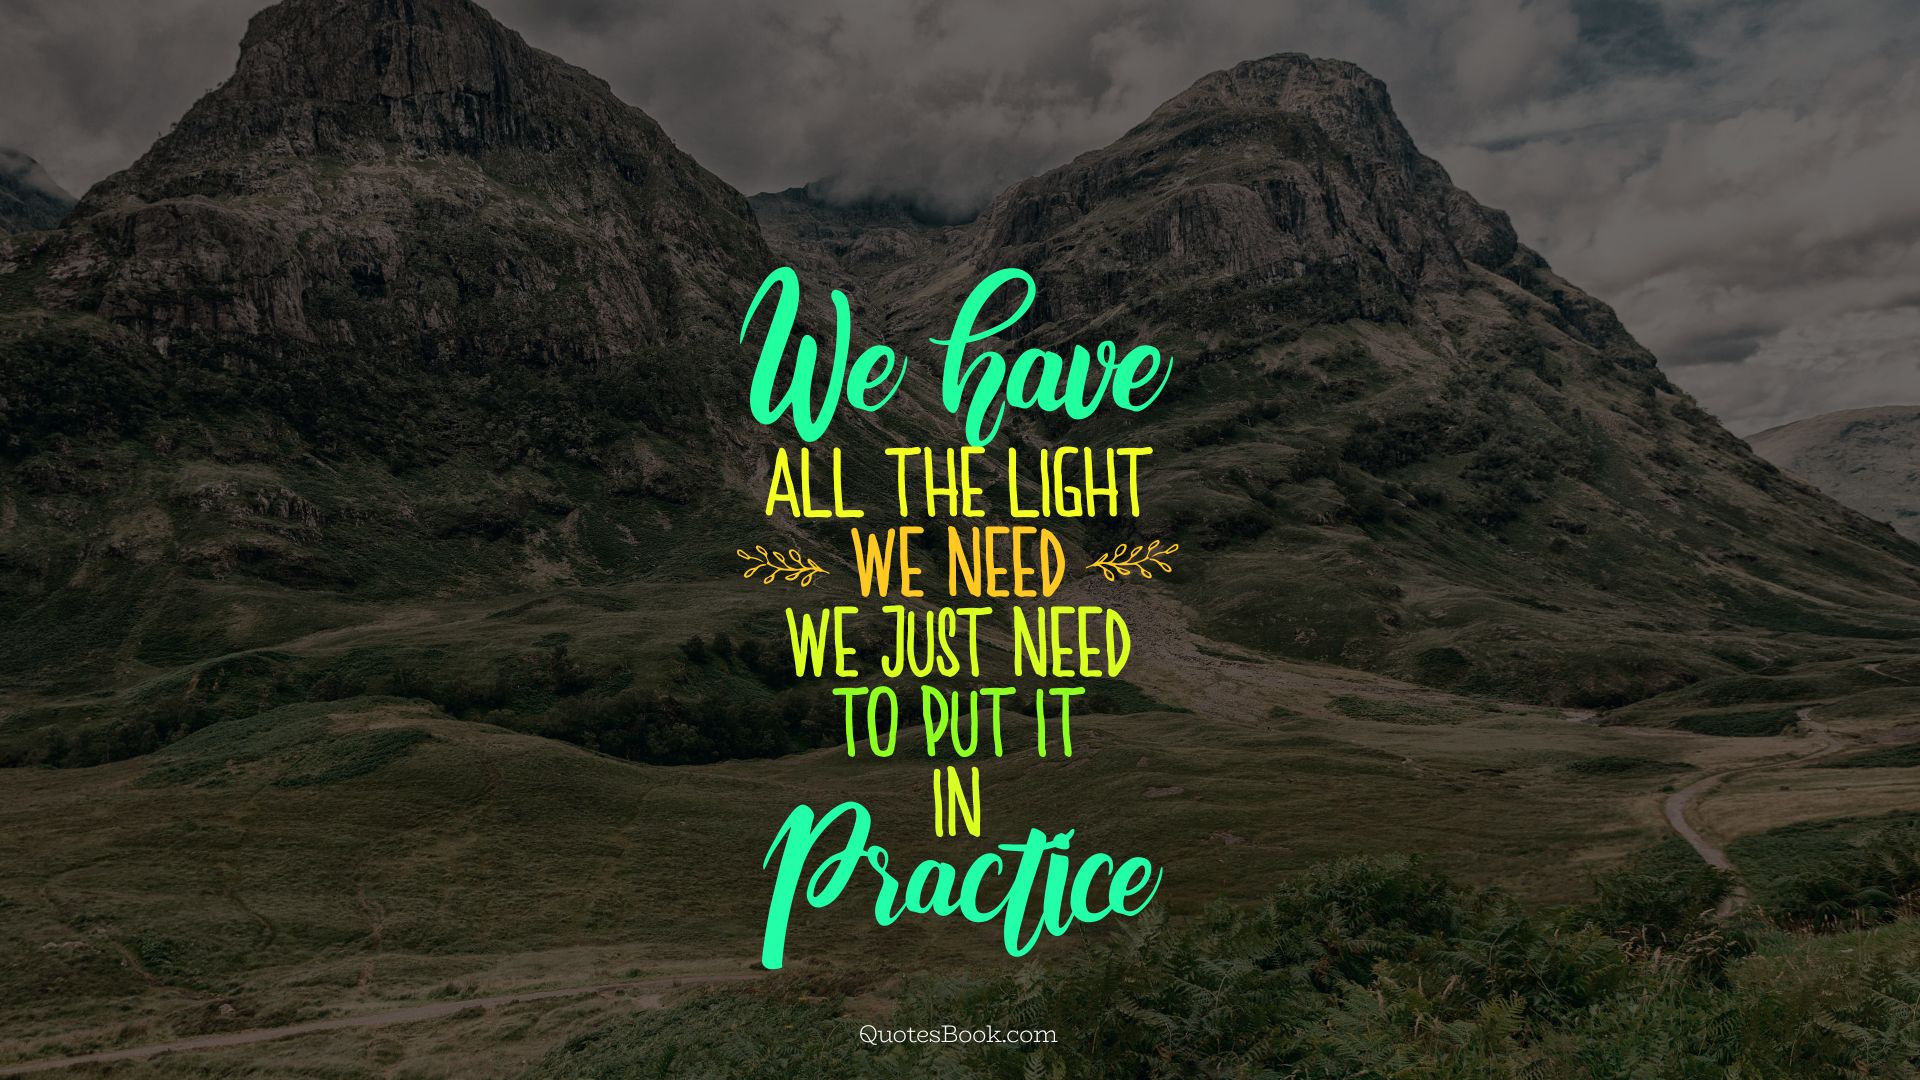 We have all the light we need, we just need to put it in practice